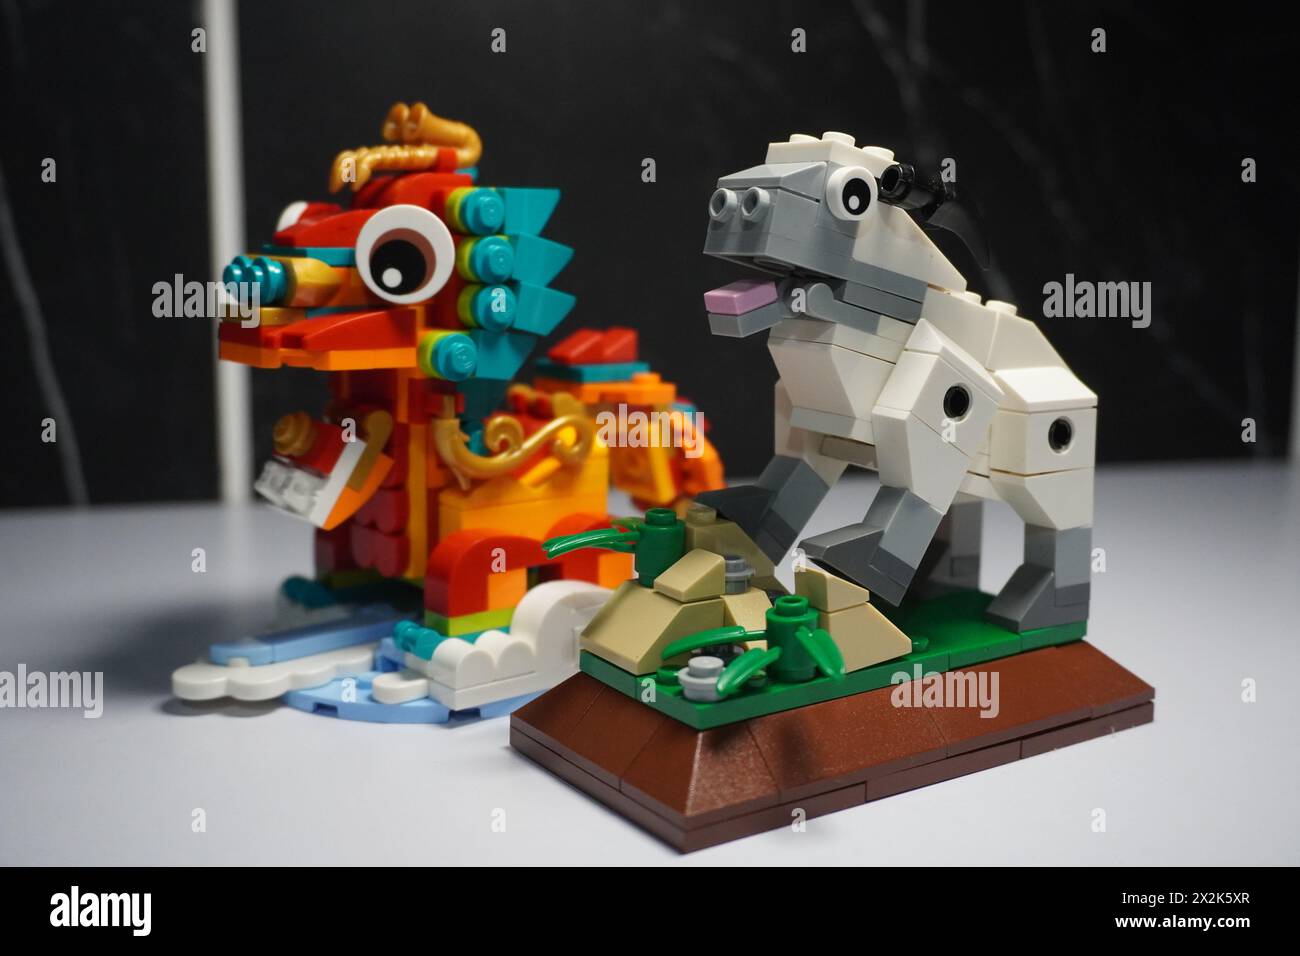 Lego in the form of a dragon and a sheep representing the zodiac signs Stock Photo